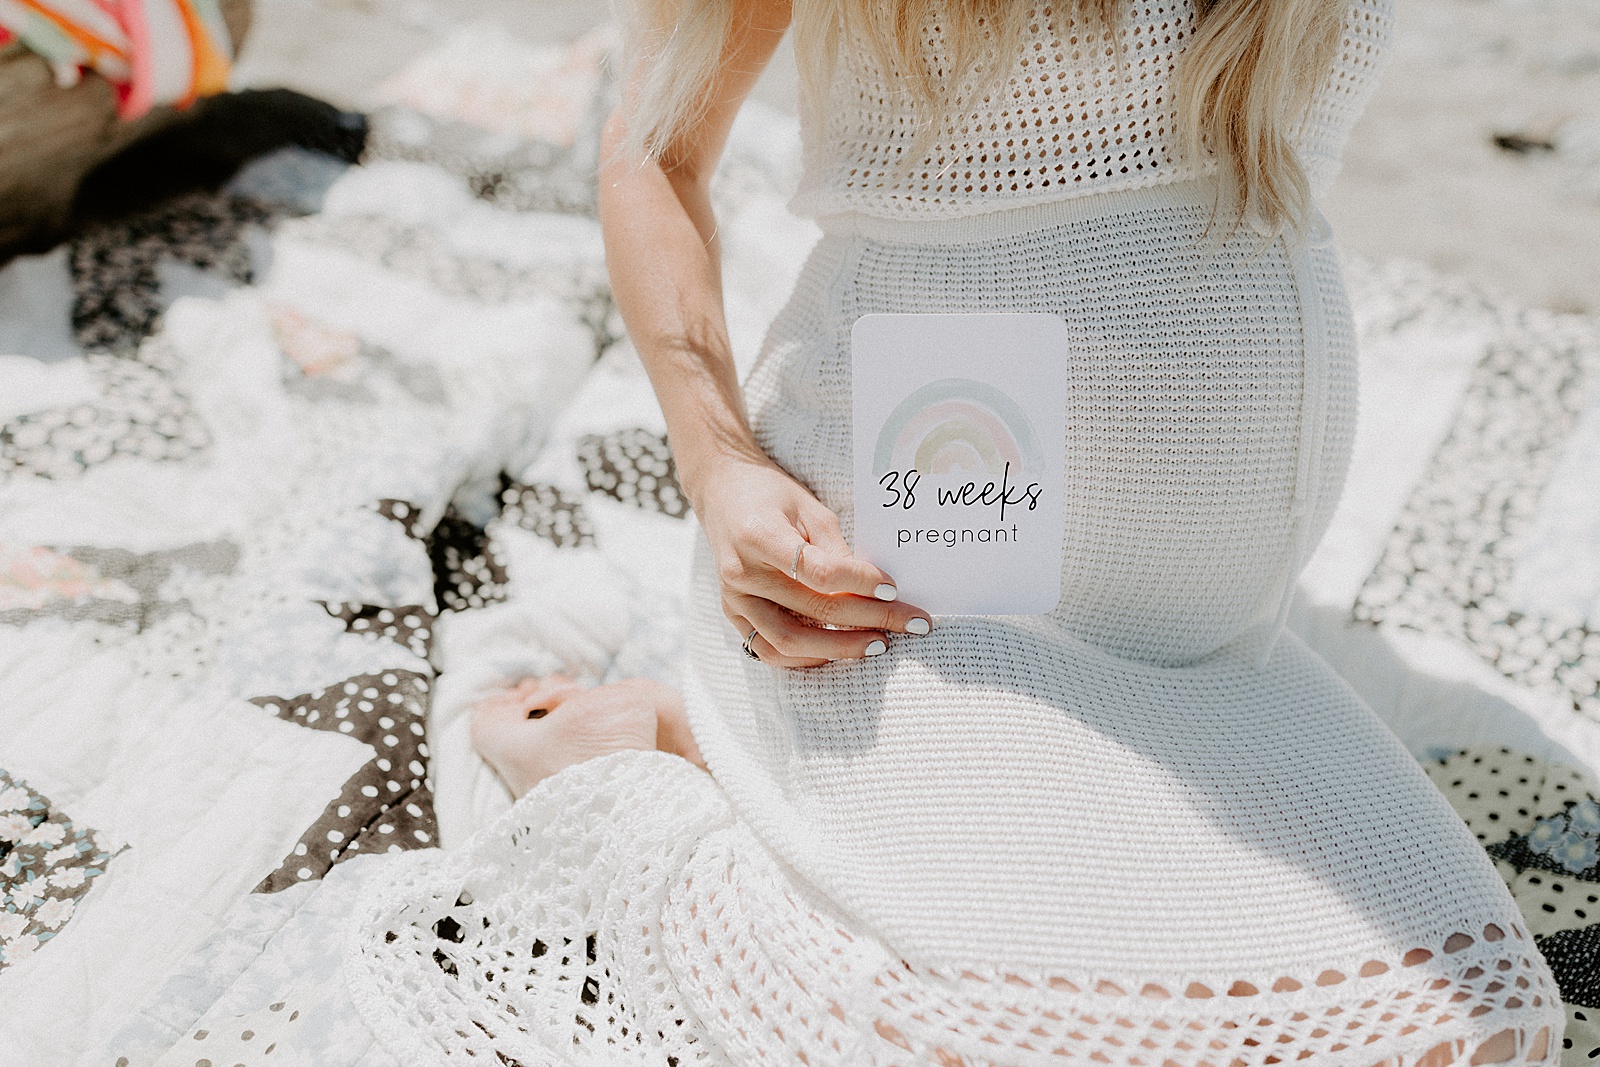 A pregnant woman holds up a pregnancy moment card in a maternity photo on a crocheted blanket.